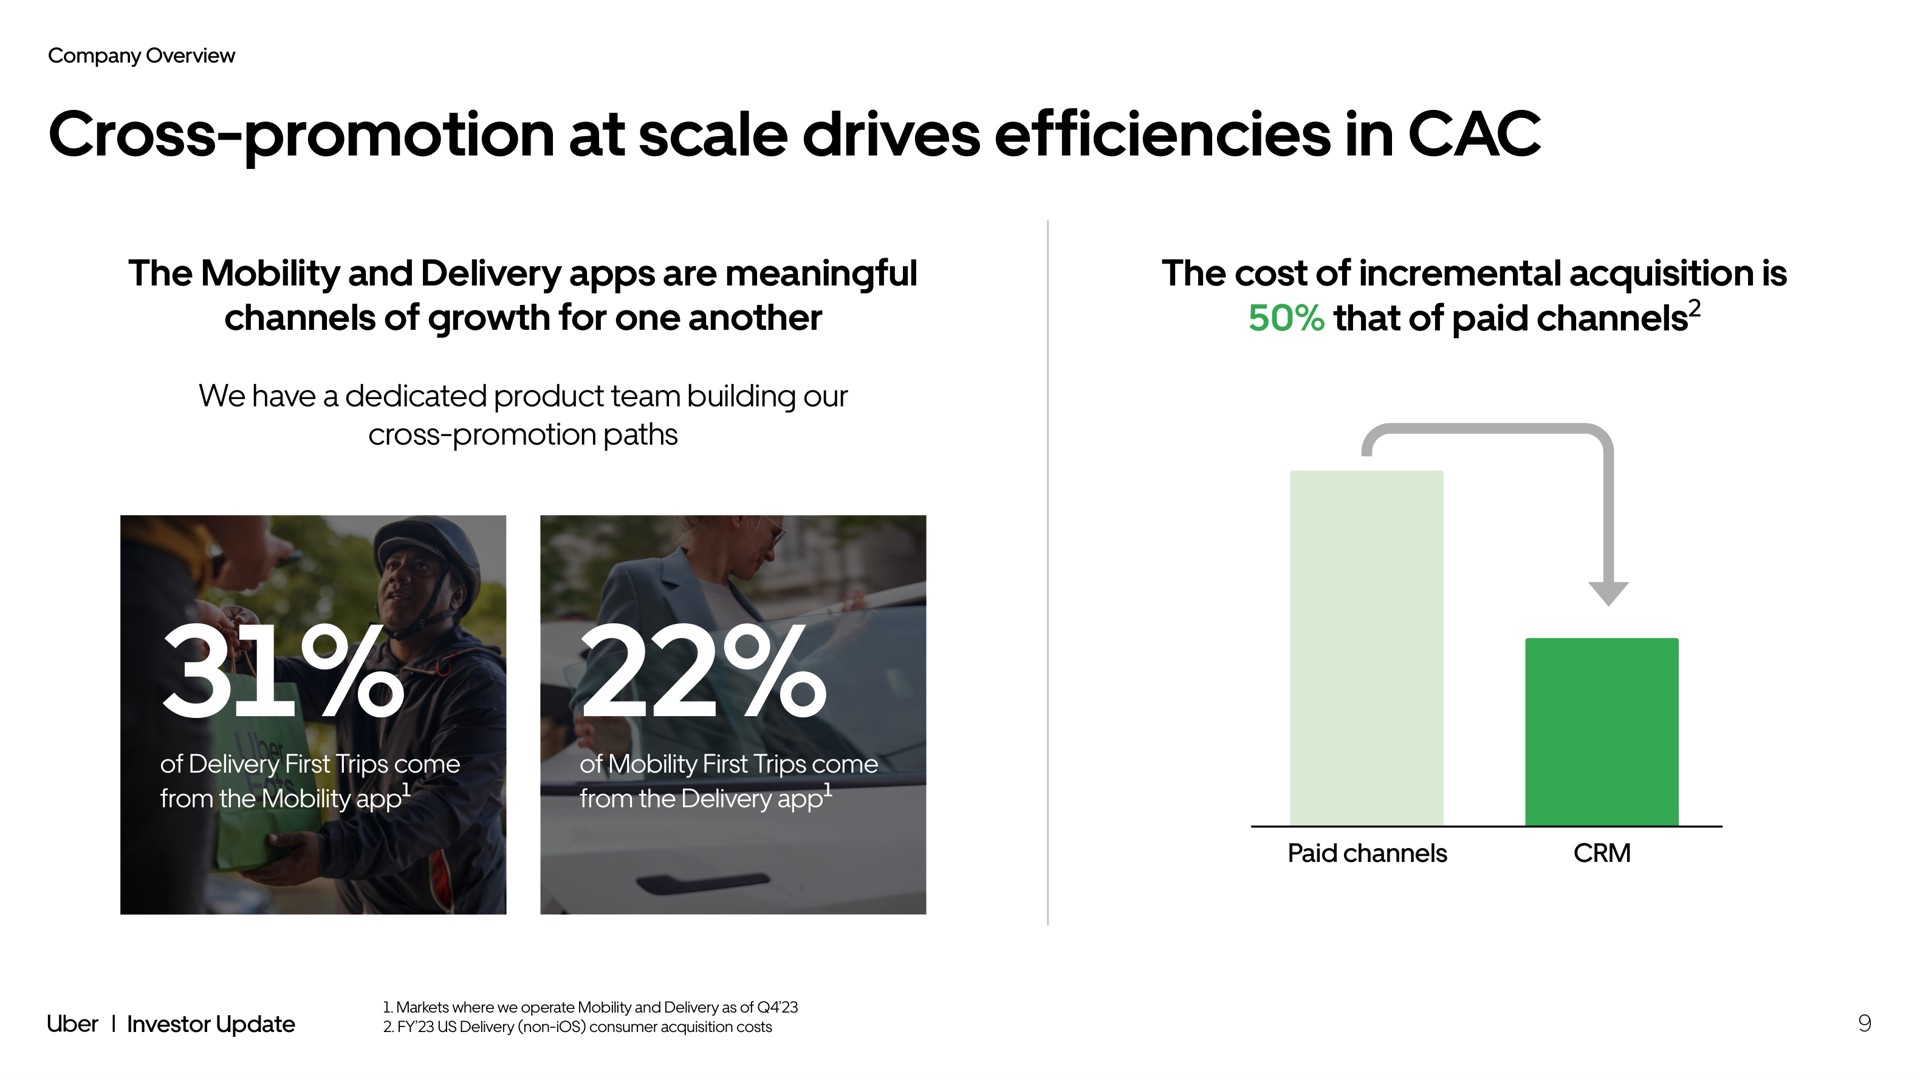 cross promotion at scale drives efficiencies in the mobility and delivery are meaningful channels of growth for one another the cost of incremental acquisition is that of paid channels | Uber